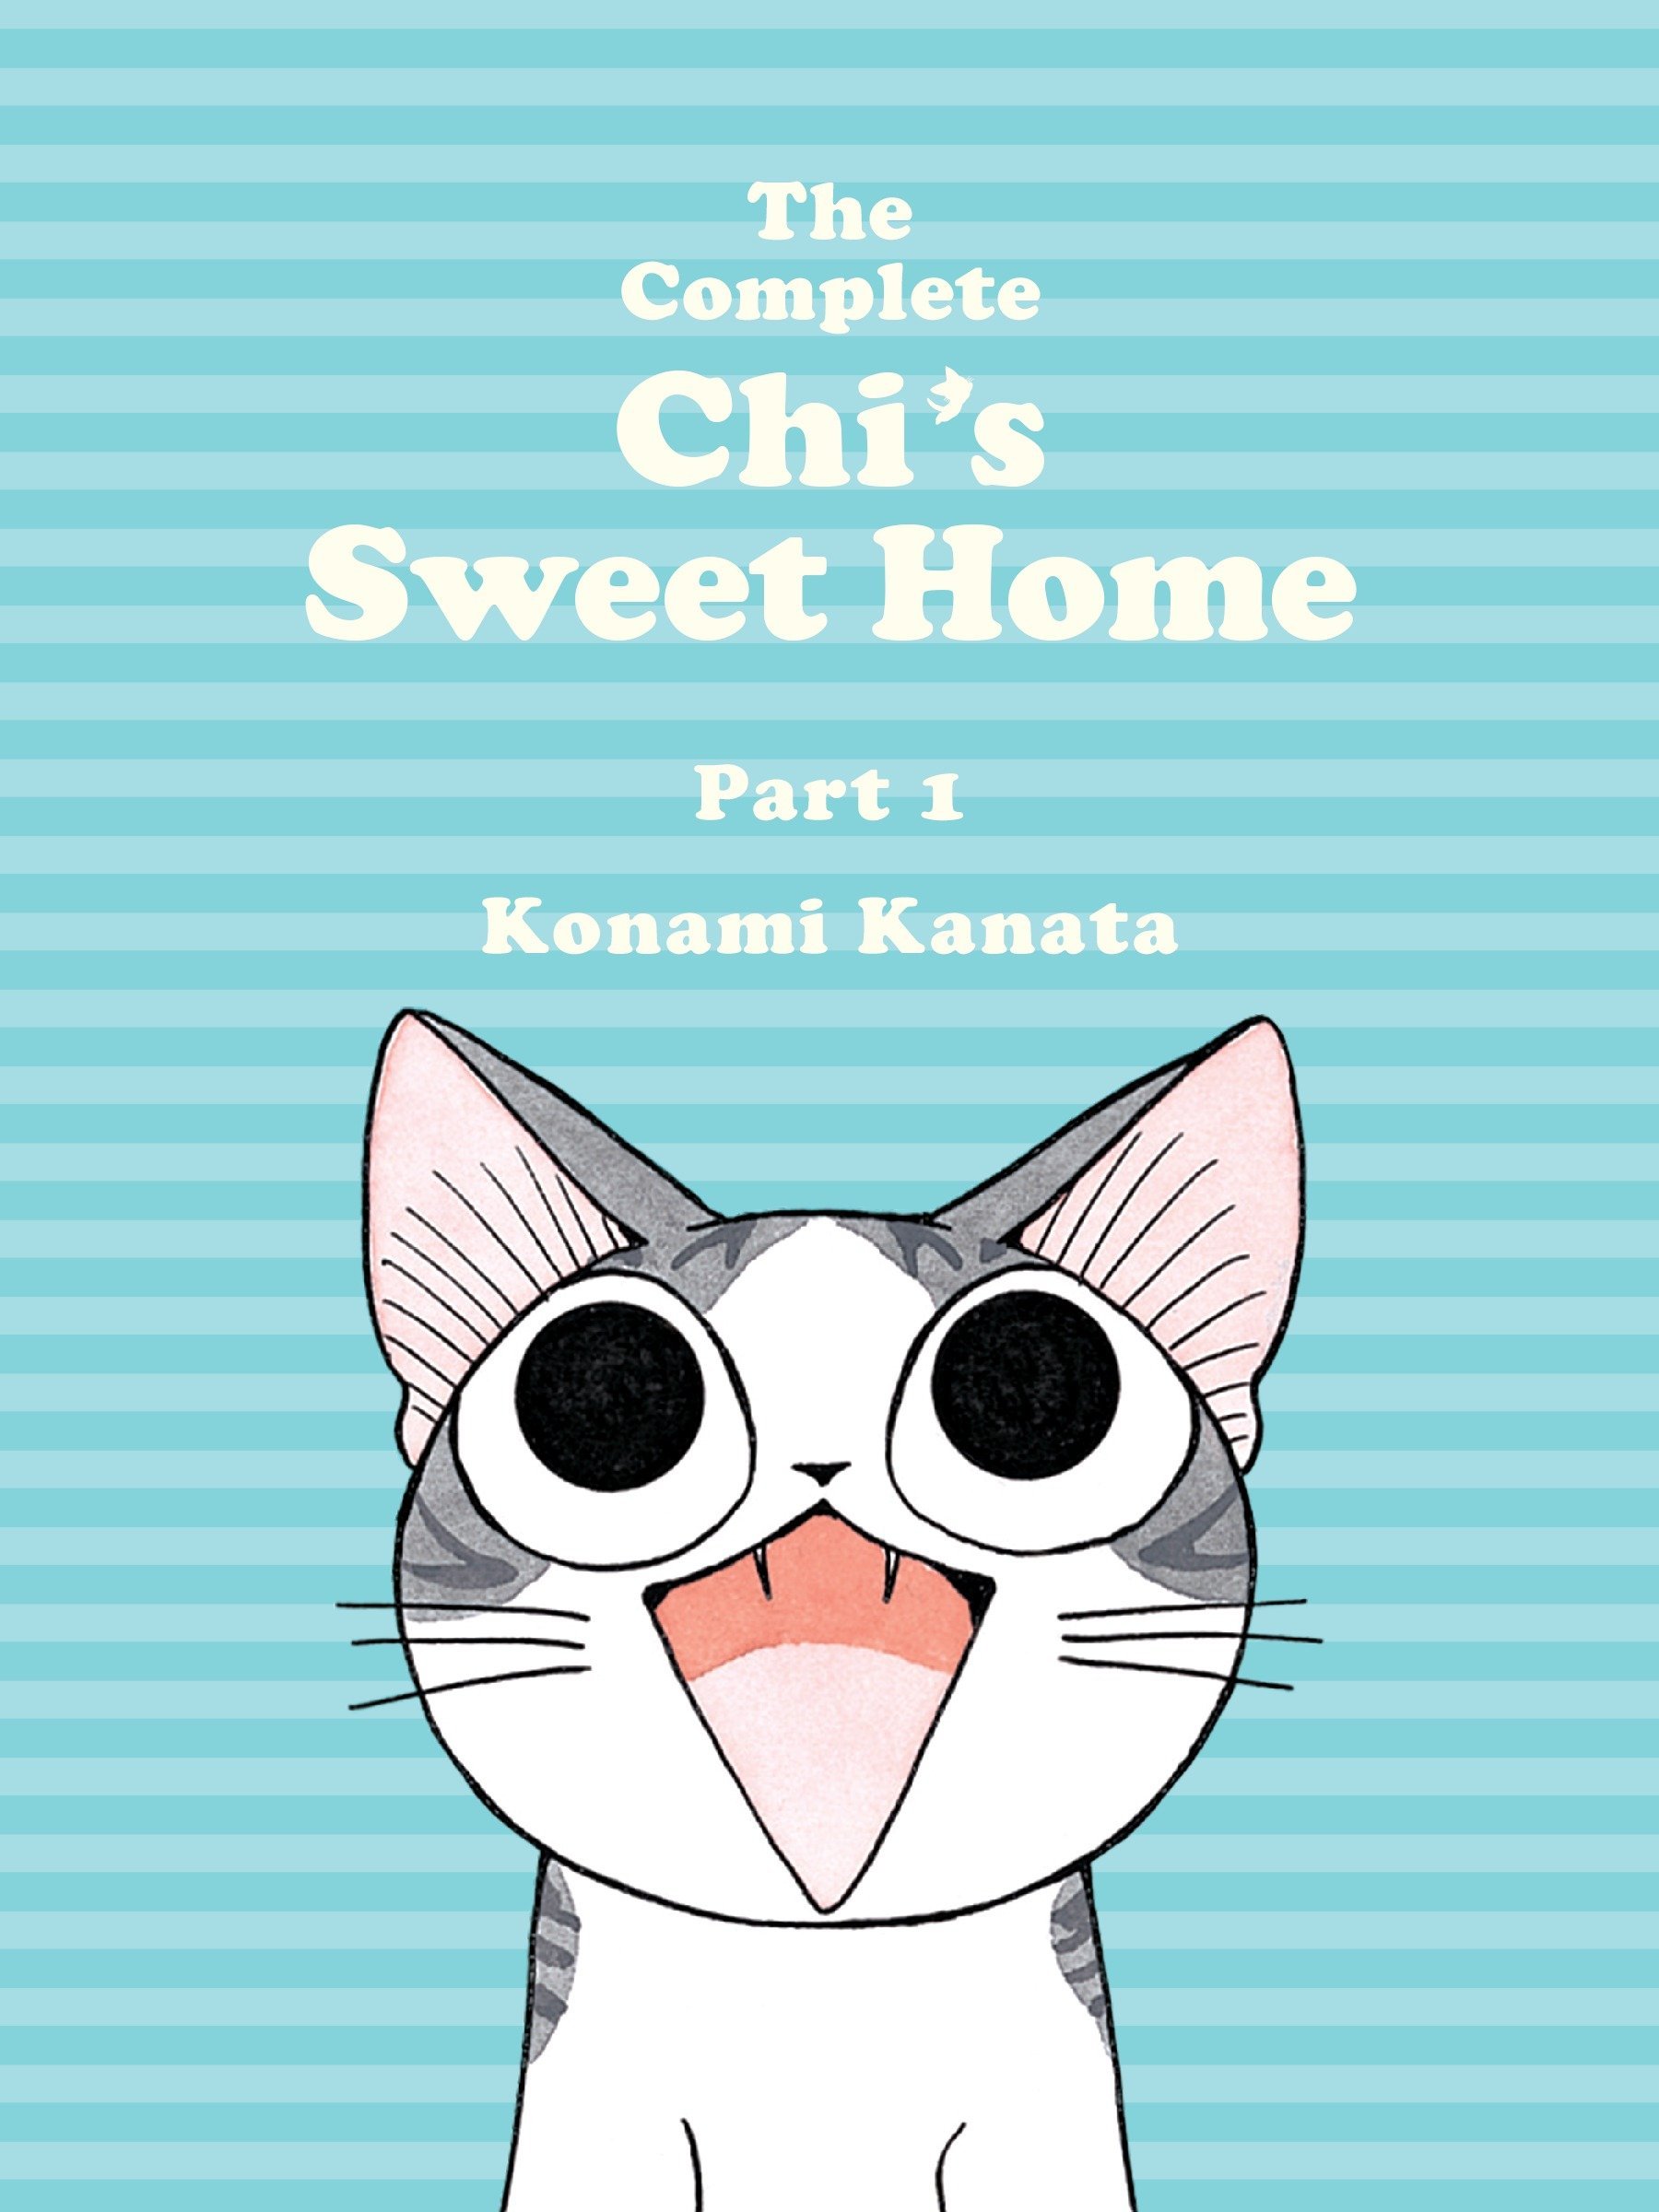 Cover image for "The Complete Chi's Sweet Home Vol 1"